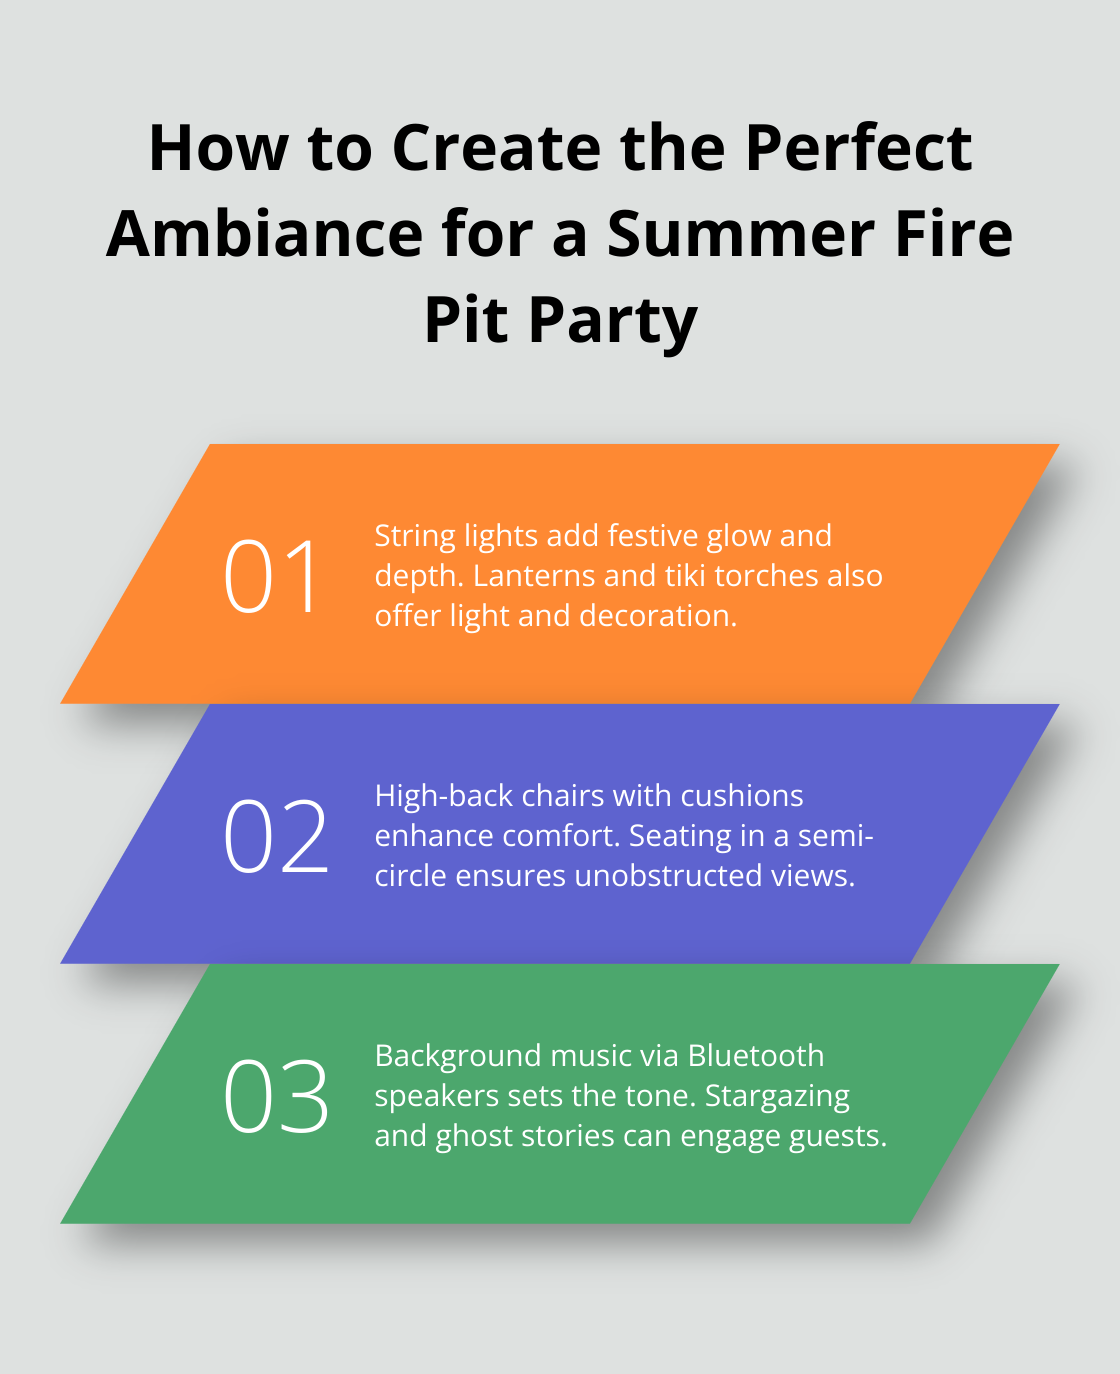 Fact - How to Create the Perfect Ambiance for a Summer Fire Pit Party